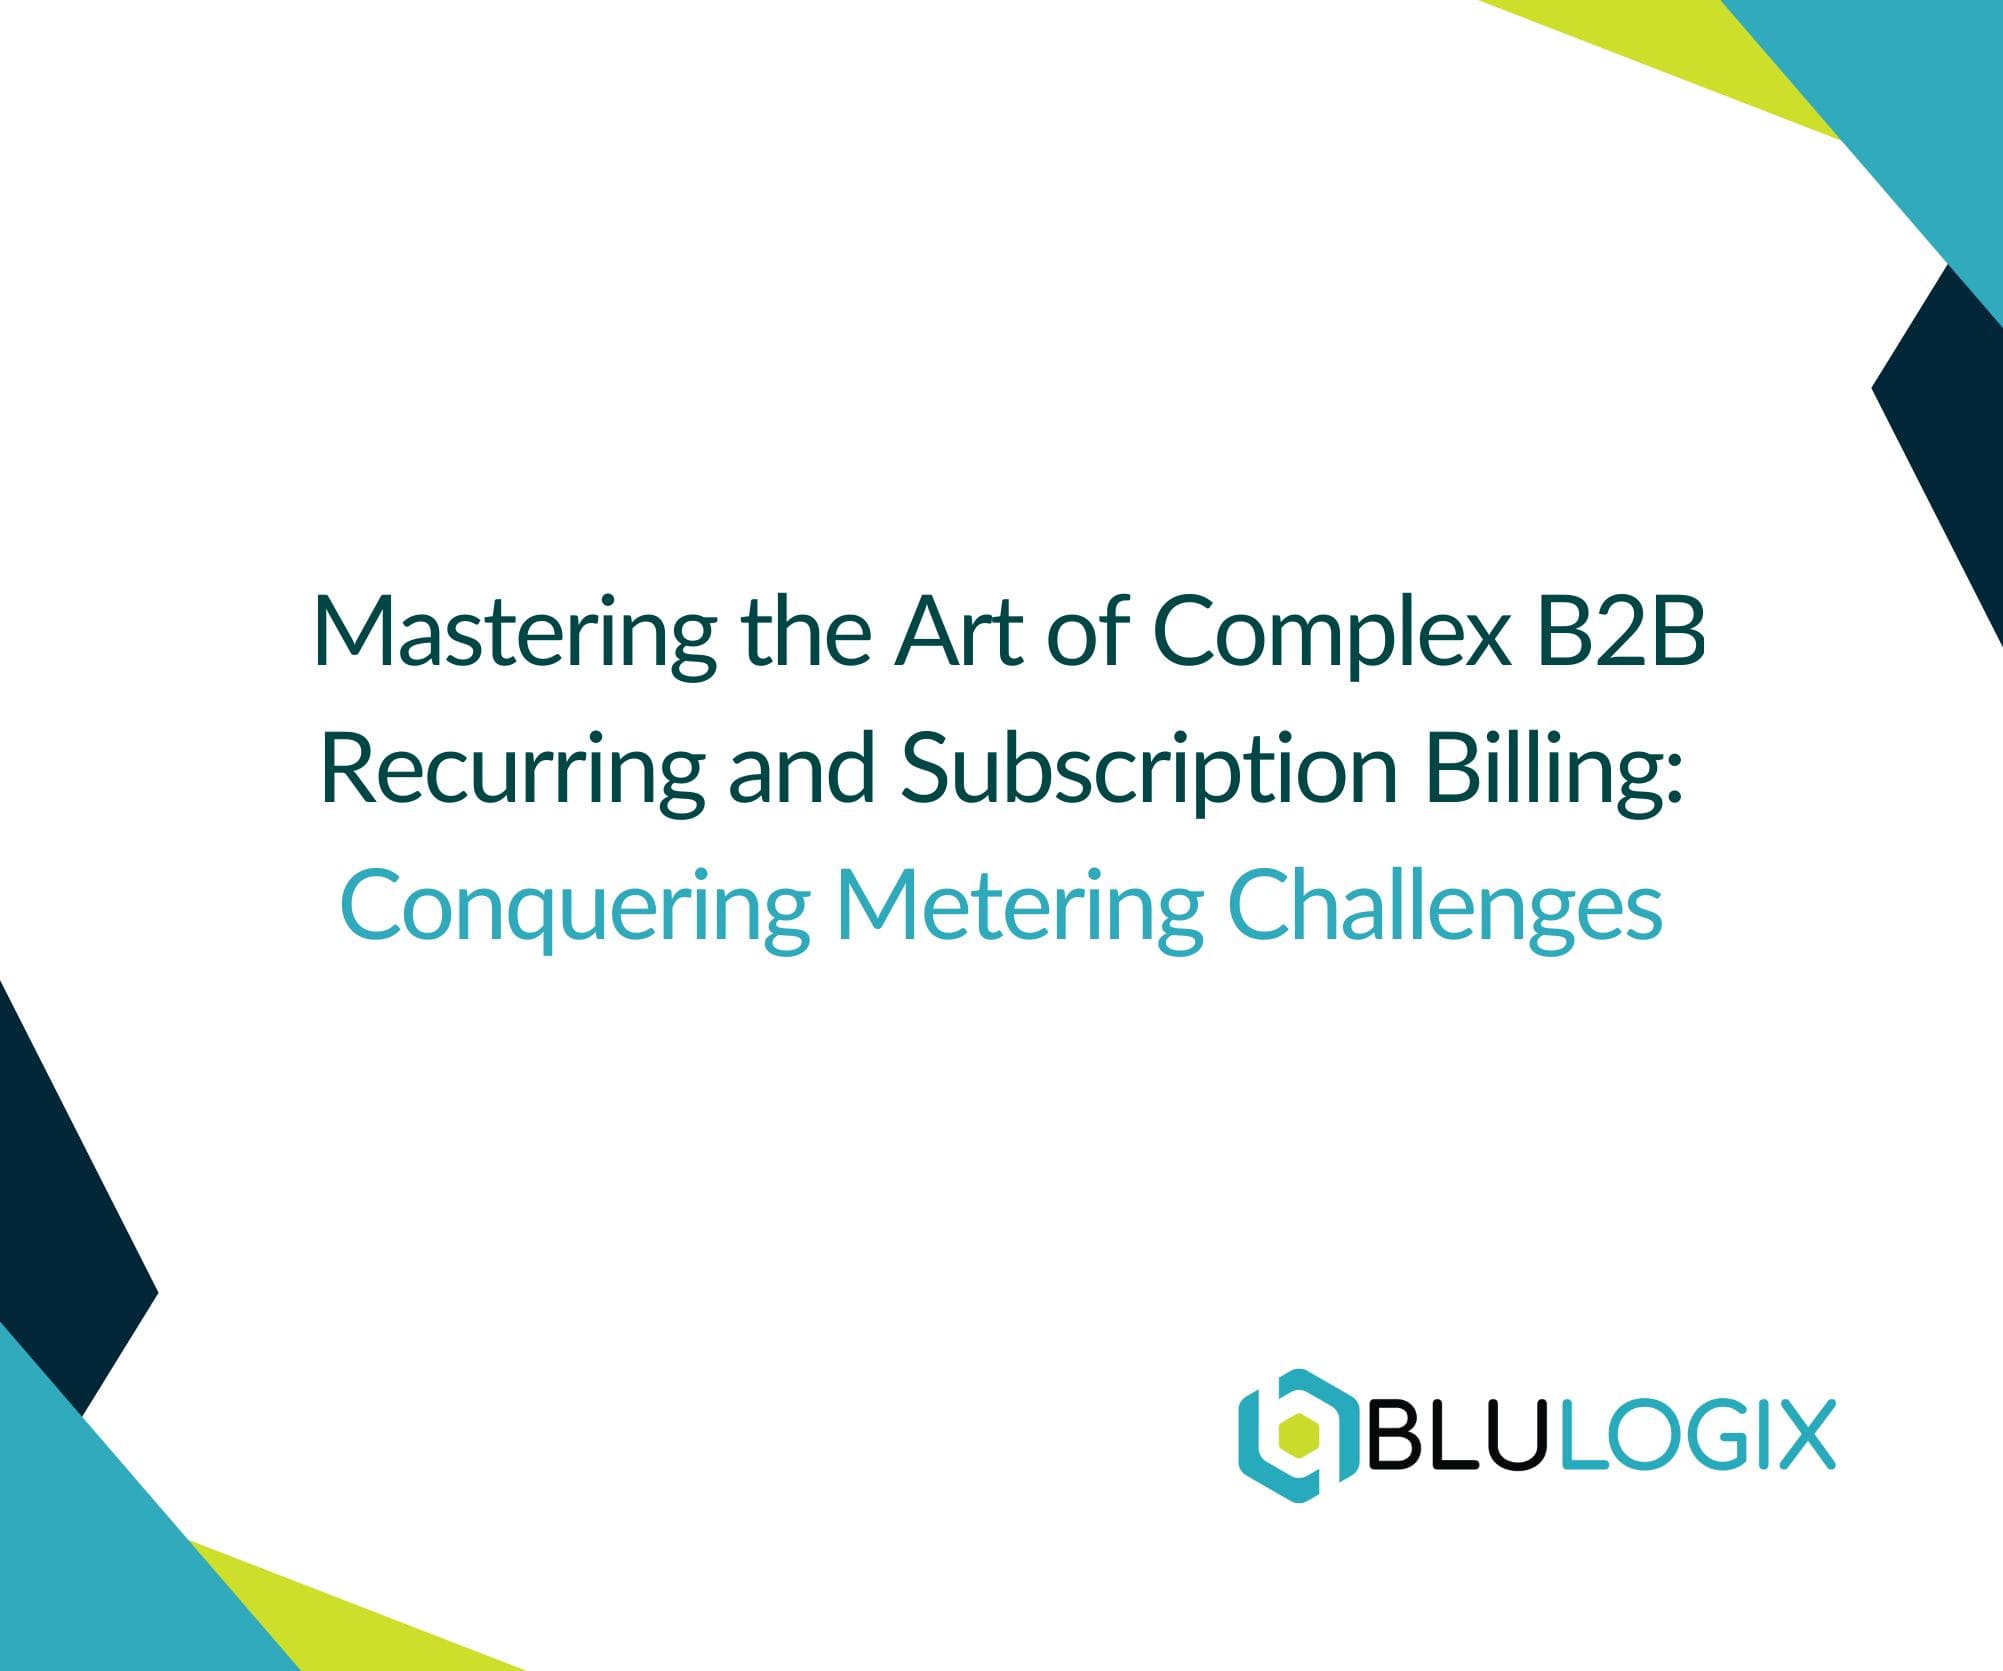 Mastering the Art of Complex B2B Recurring and Subscription Billing: Conquering Metering Challenges